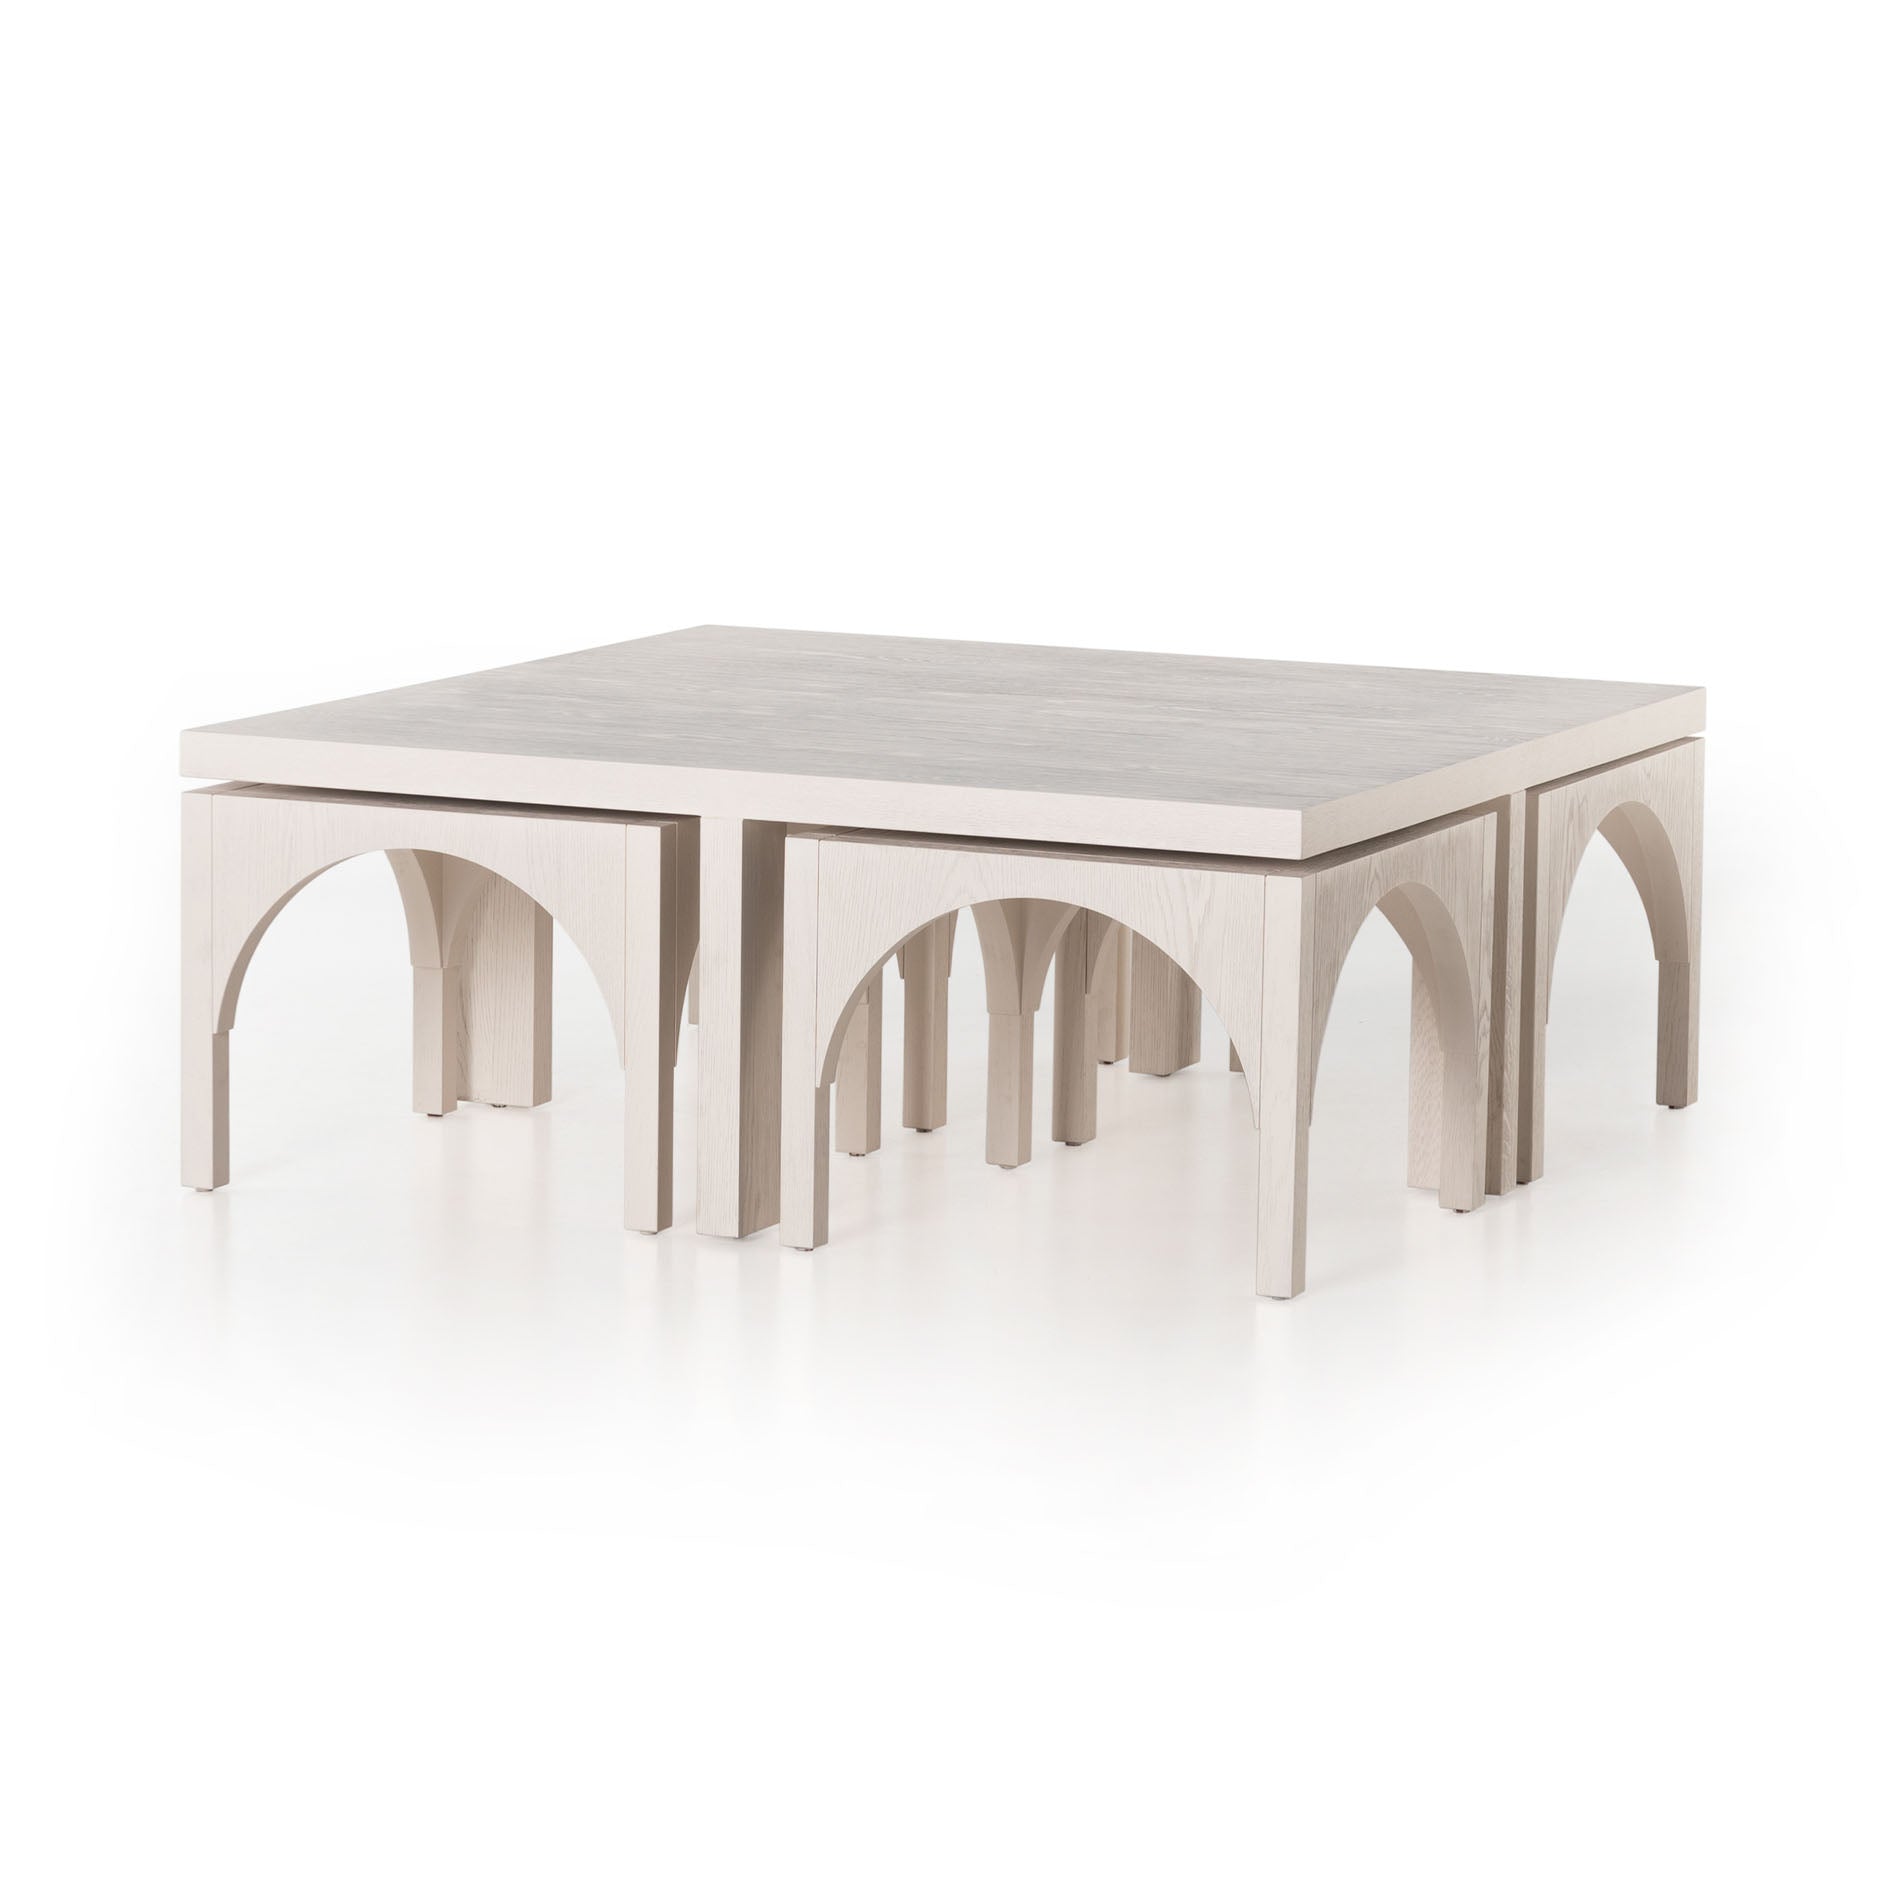 Modern oak coffee table with four separate nesting tables